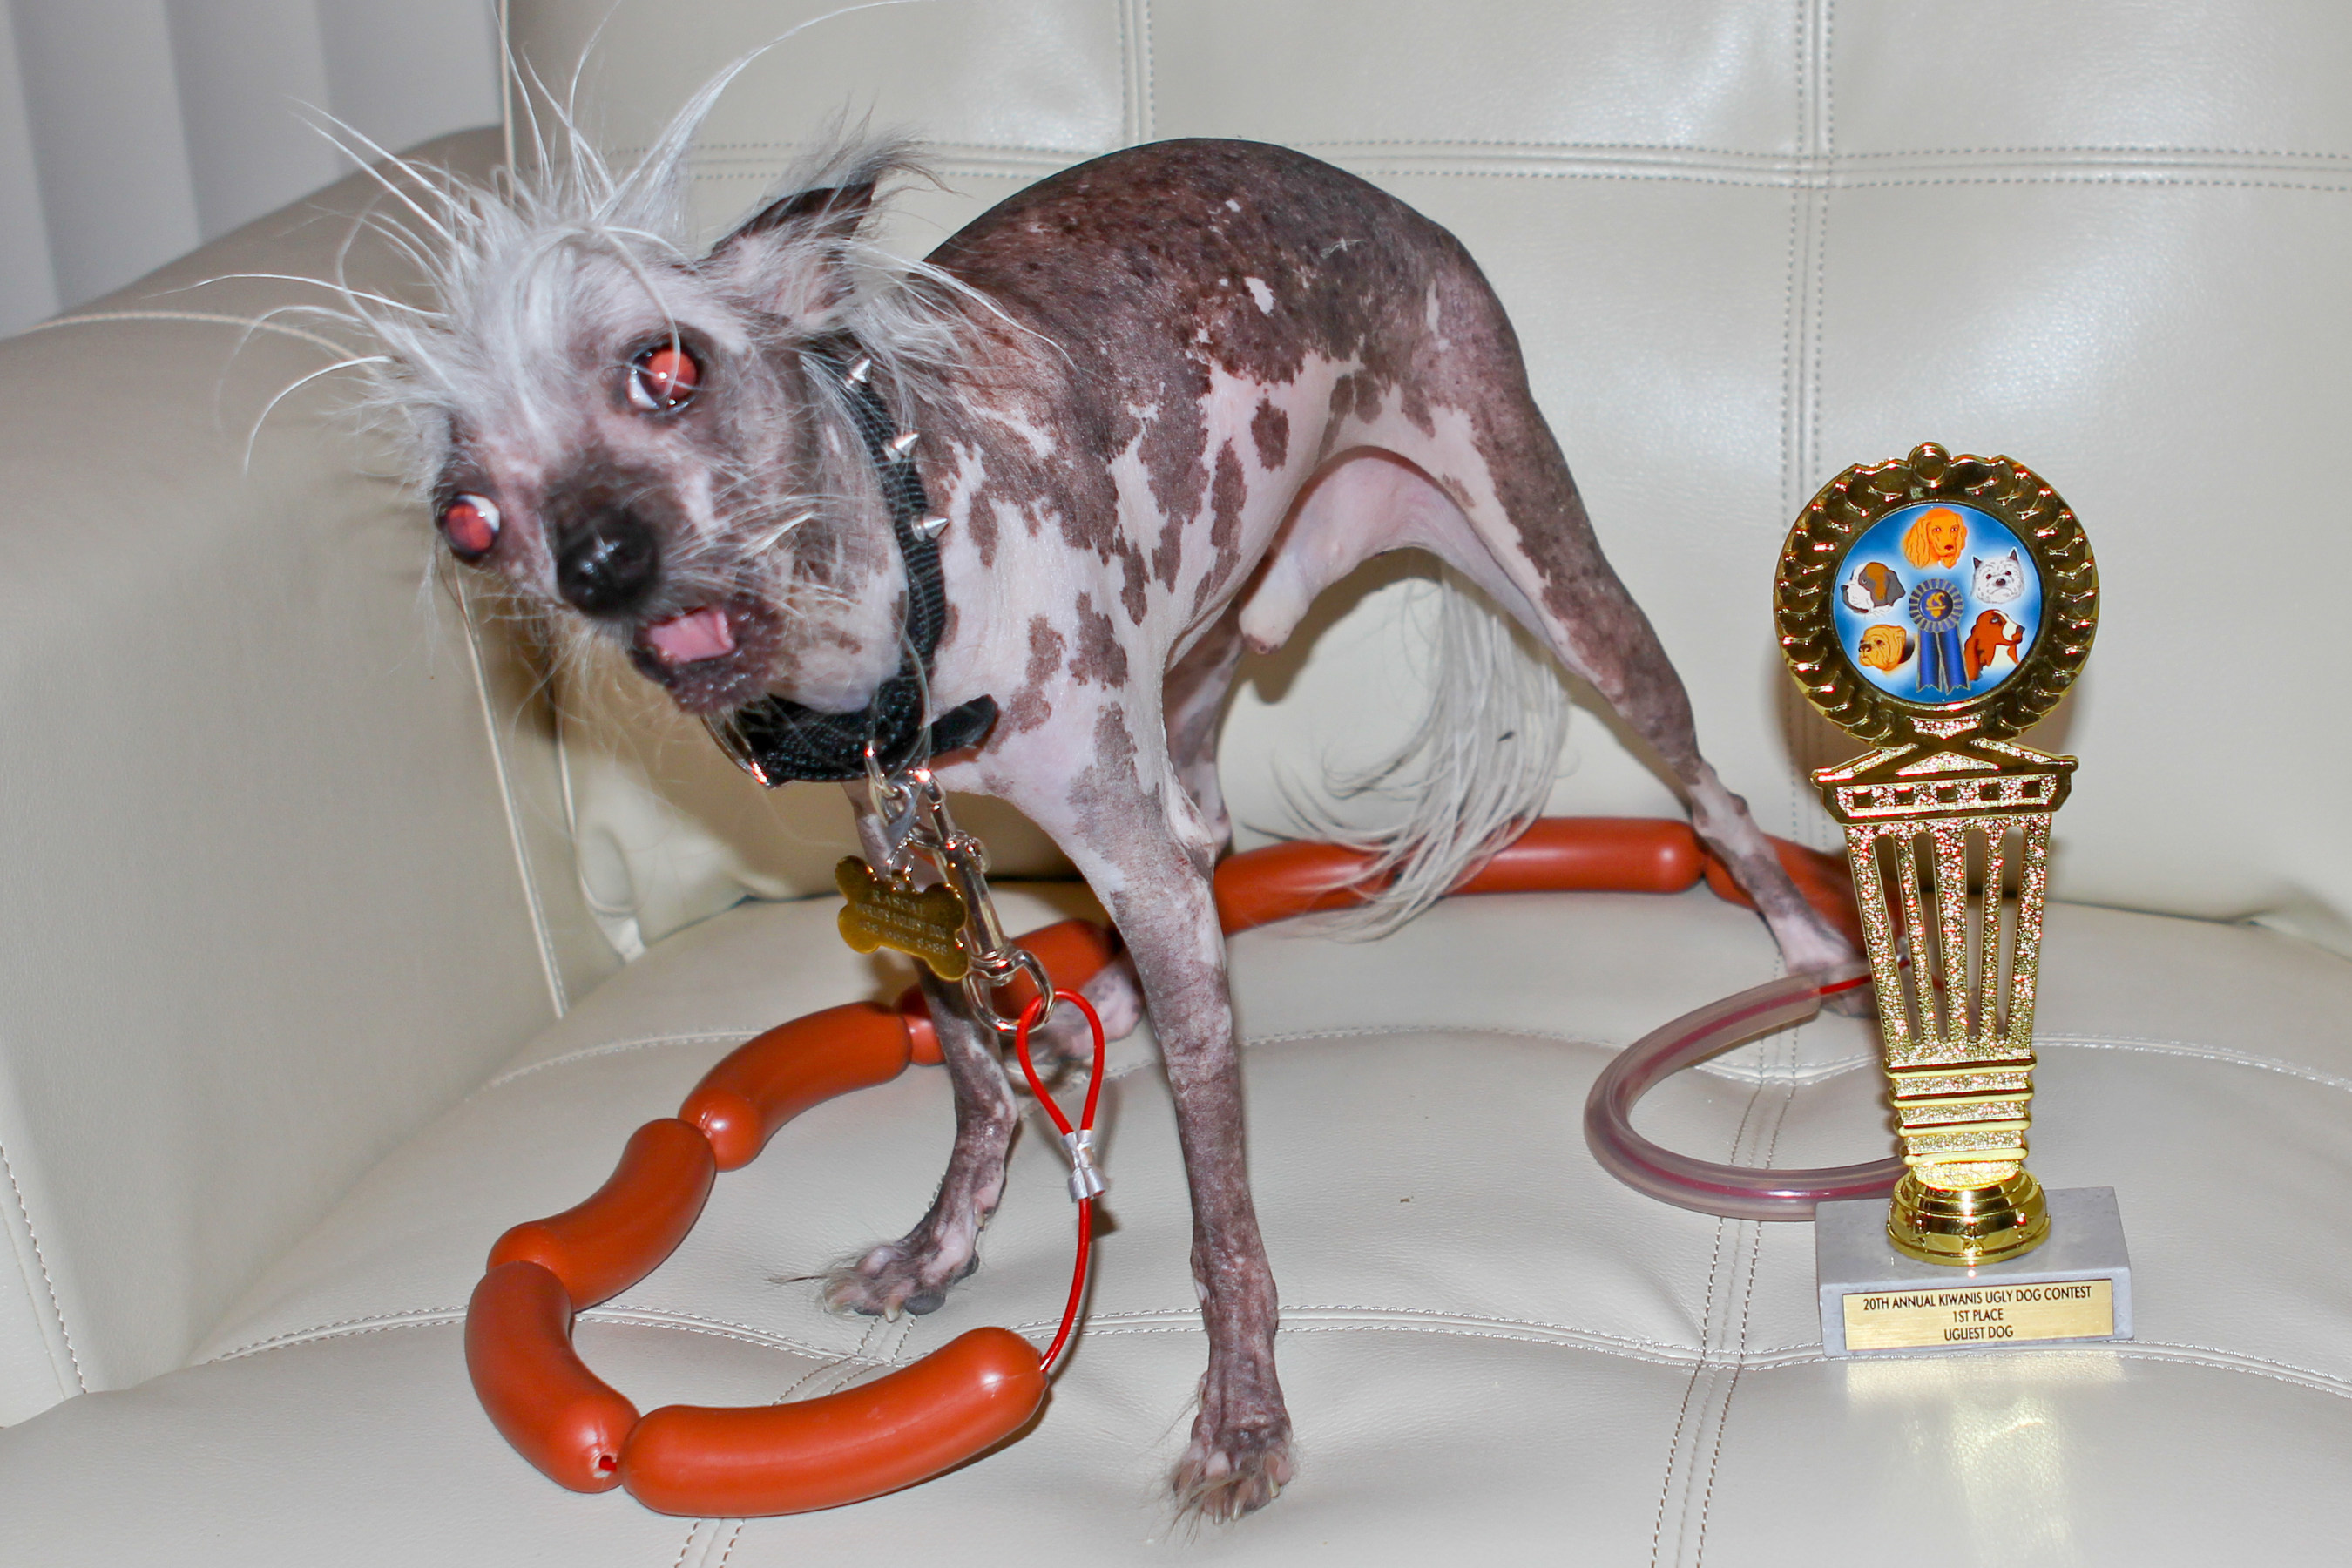 ugliest dog in the world 2010